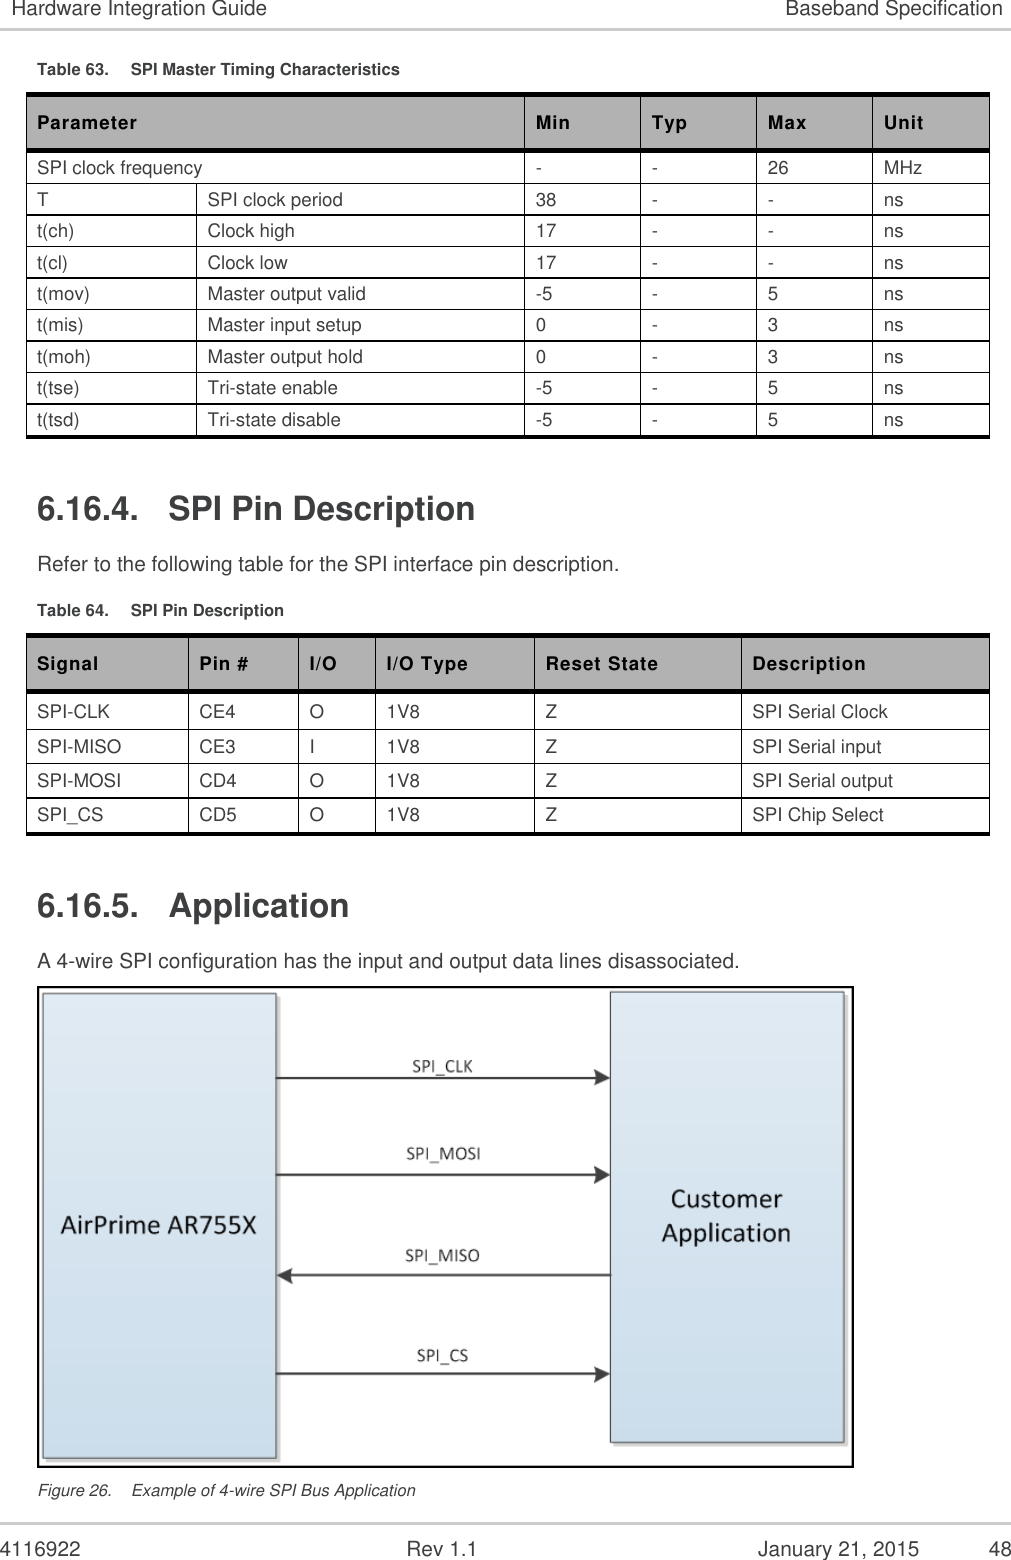   4116922              Rev 1.1          January 21, 2015  48 Hardware Integration Guide Baseband Specification Table 63.  SPI Master Timing Characteristics Parameter Min Typ Max Unit SPI clock frequency - - 26 MHz T SPI clock period 38 - - ns t(ch) Clock high 17 - - ns t(cl) Clock low 17 - - ns t(mov) Master output valid -5 - 5 ns t(mis) Master input setup 0 - 3 ns t(moh) Master output hold 0 - 3 ns t(tse) Tri-state enable -5 - 5 ns t(tsd) Tri-state disable -5 - 5 ns 6.16.4.  SPI Pin Description Refer to the following table for the SPI interface pin description. Table 64.  SPI Pin Description Signal Pin # I/O I/O Type Reset State Description SPI-CLK CE4 O 1V8 Z SPI Serial Clock SPI-MISO CE3 I 1V8 Z SPI Serial input SPI-MOSI CD4 O 1V8 Z SPI Serial output SPI_CS  CD5 O 1V8 Z SPI Chip Select 6.16.5.  Application A 4-wire SPI configuration has the input and output data lines disassociated.  Figure 26.  Example of 4-wire SPI Bus Application 